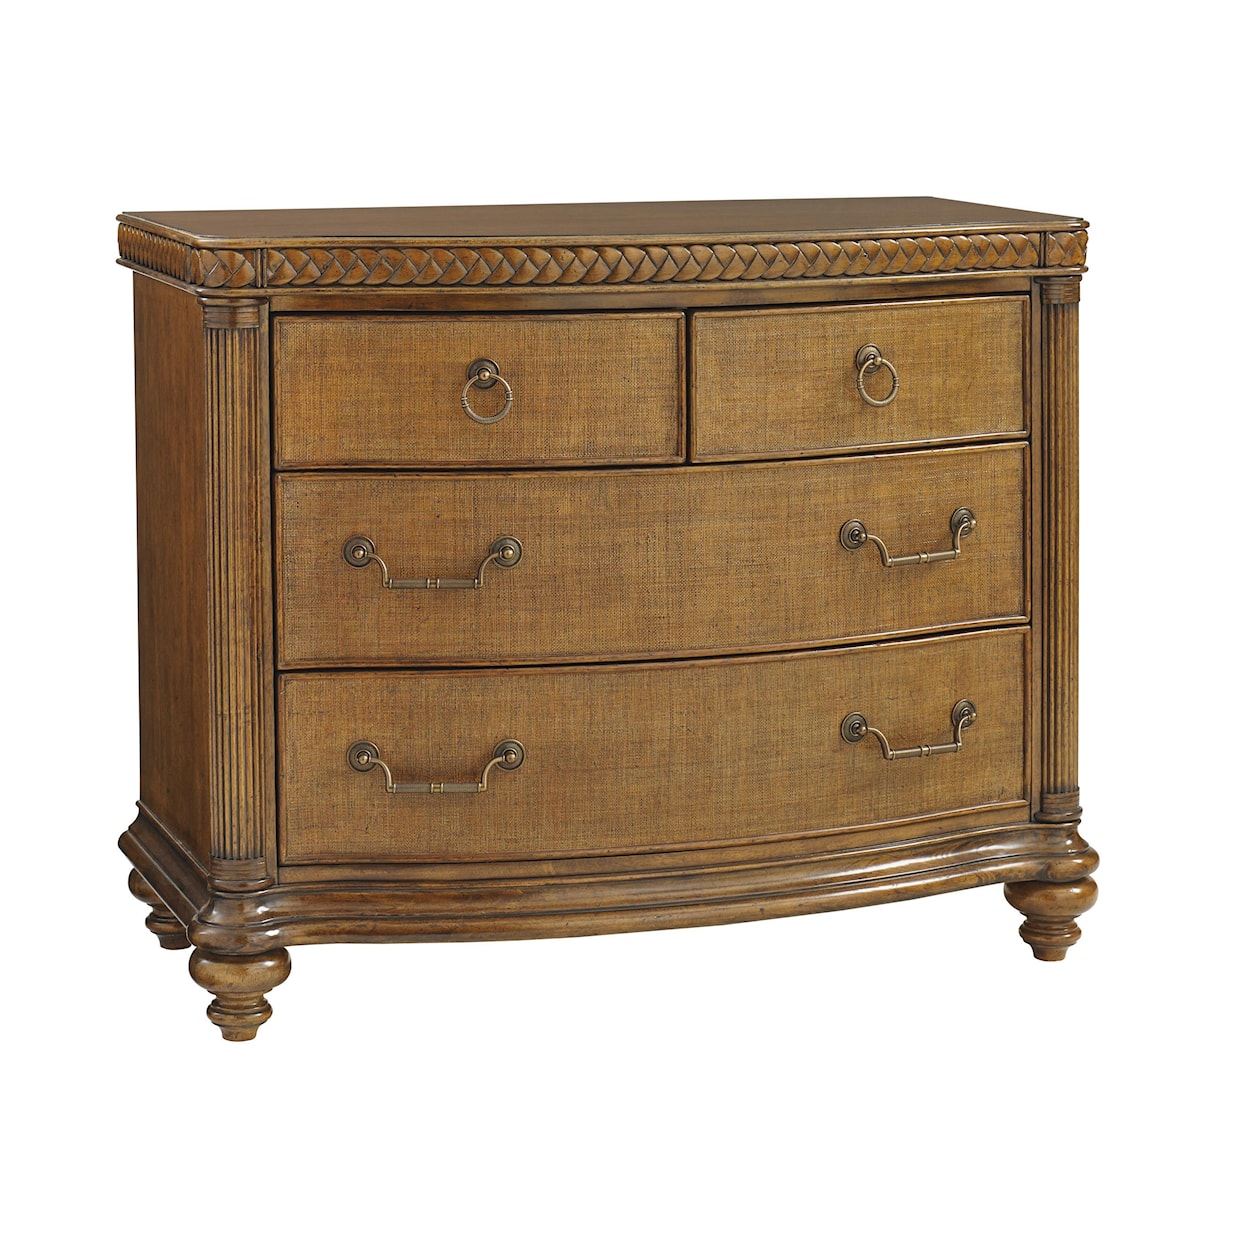 Tommy Bahama Home Bali Hai Silver Sands Bachelor's Chest